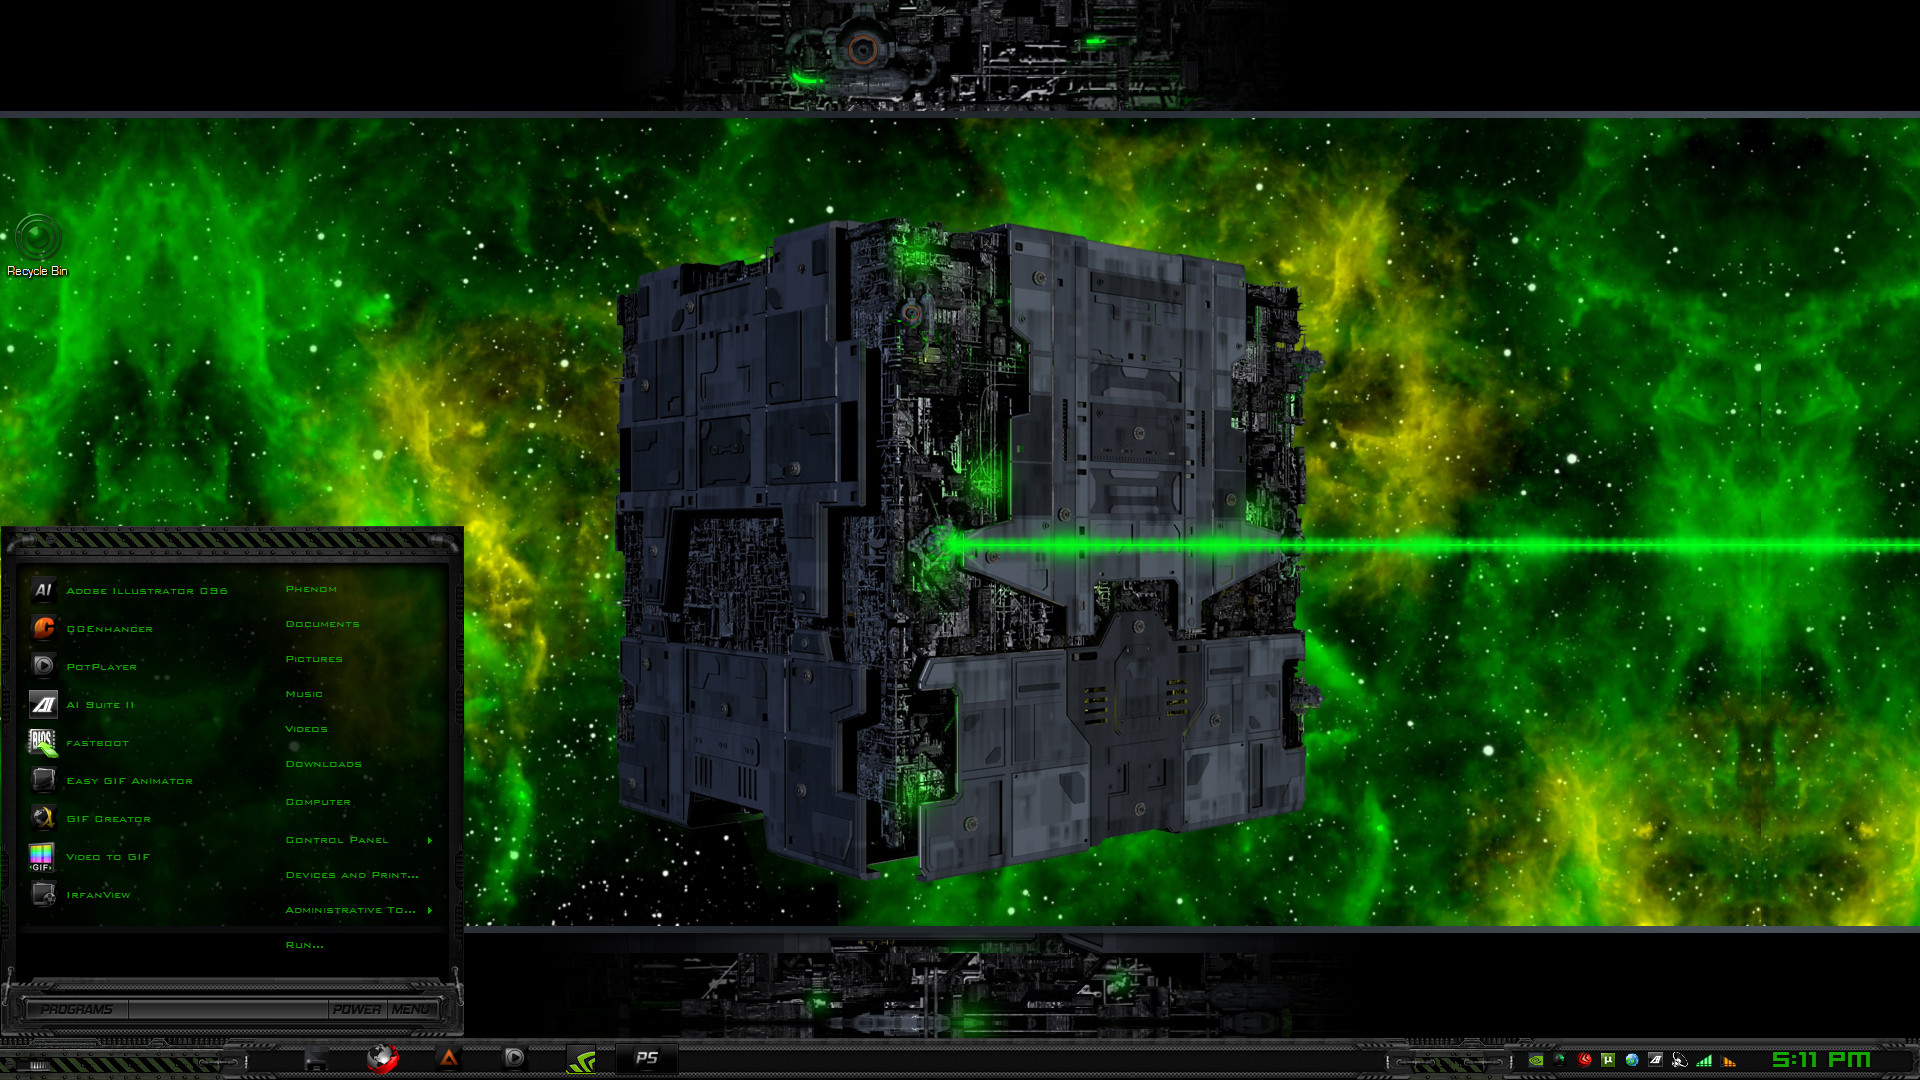 To all VC members you will now be assimilated into the Borg Collective. As promised to round out the Star Trek themes here comes the Borg Resistance is